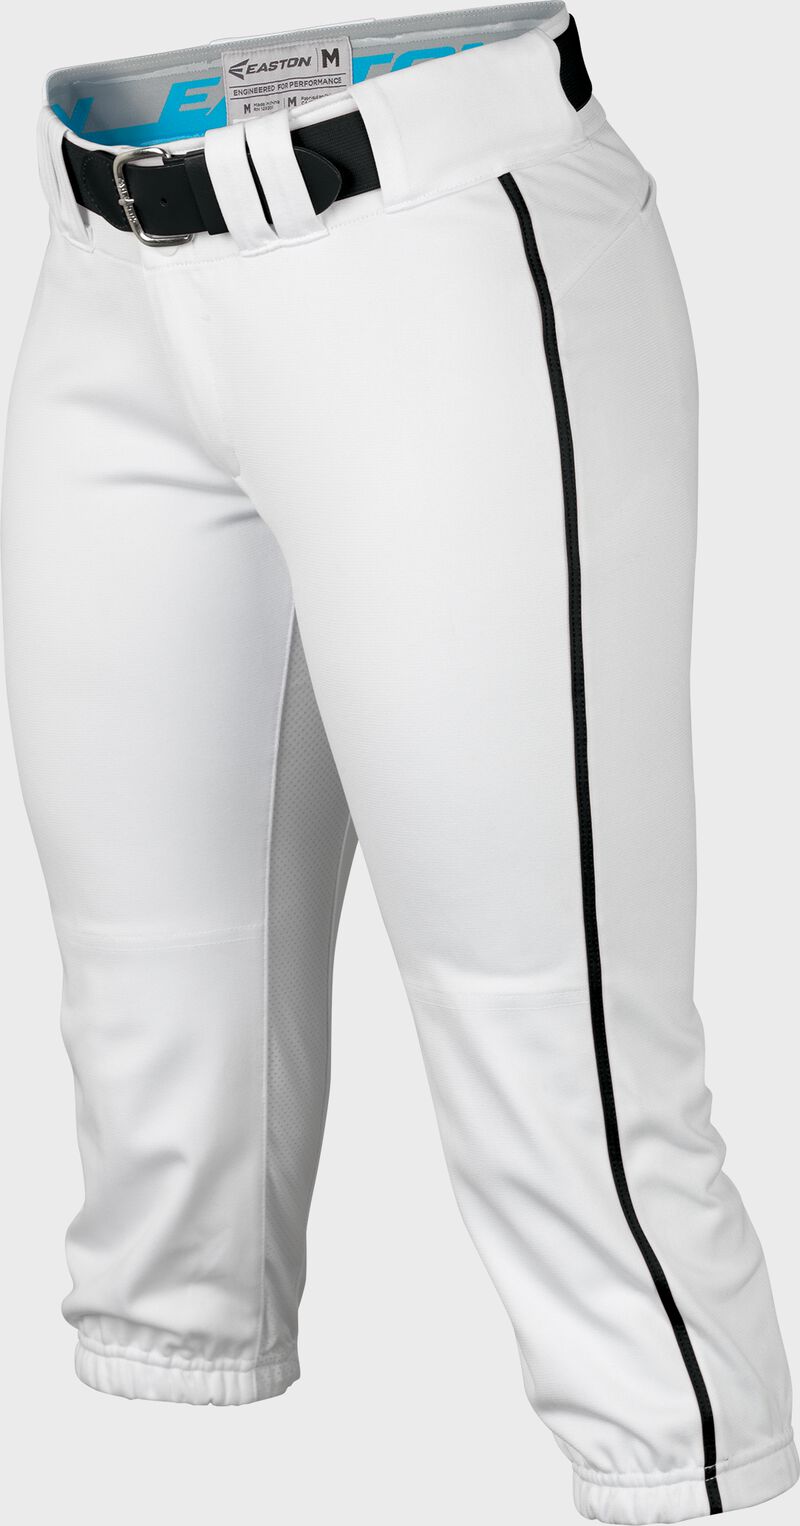 Easton Prowess Softball Pant Women's Piped WHITE/NAVY  XL image number null